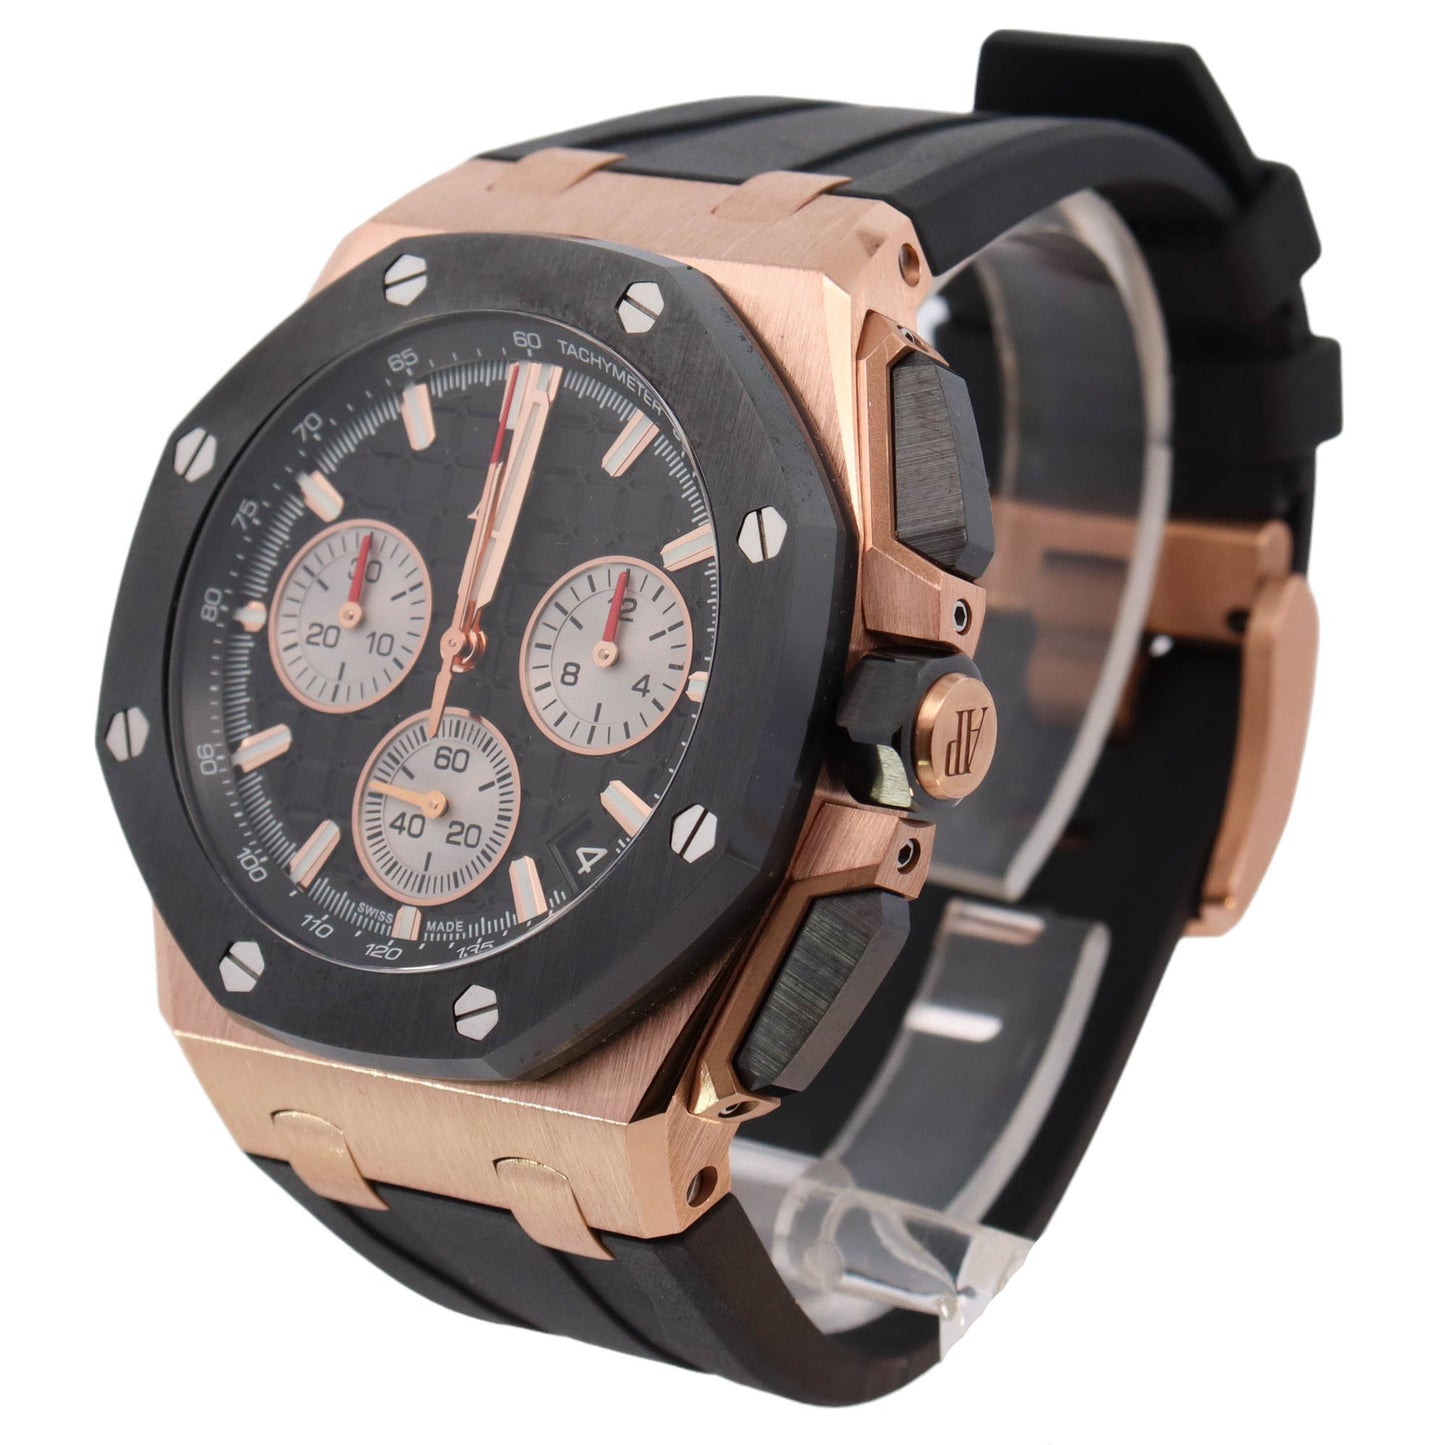 Audemars Piguet Royal Oak Offshore Rose Gold 43mm Black Chronograph Dial Watch Reference# 26420RO.OO.A002CA.01 - Happy Jewelers Fine Jewelry Lifetime Warranty